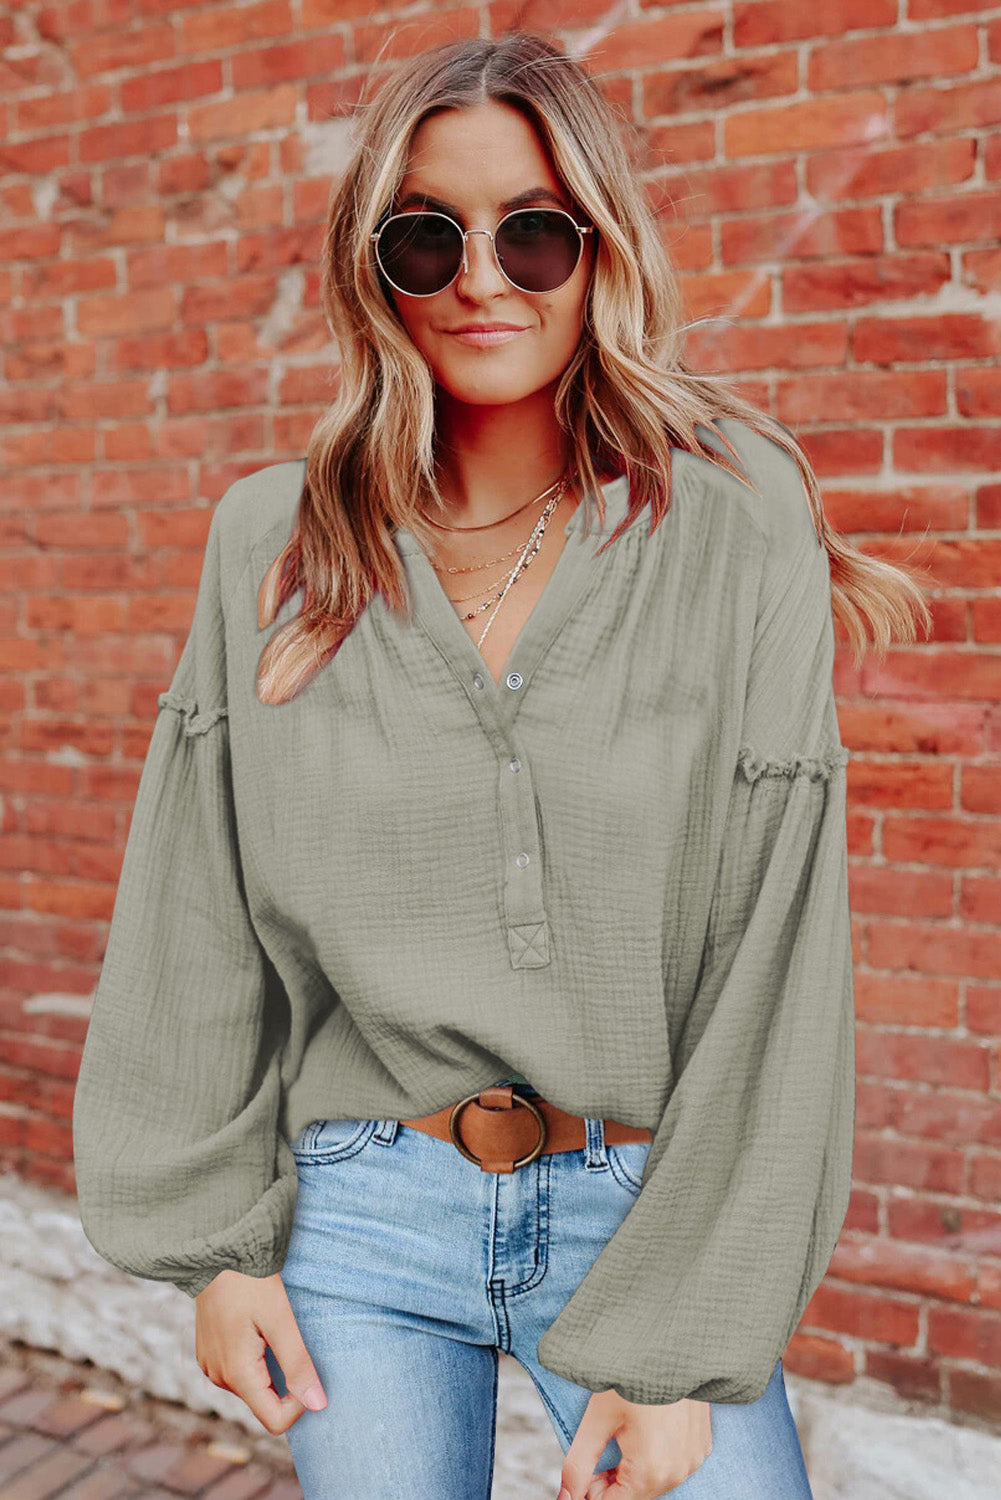 Green Casual Balloon Sleeve Crinkled Top Long Sleeve Tops JT's Designer Fashion